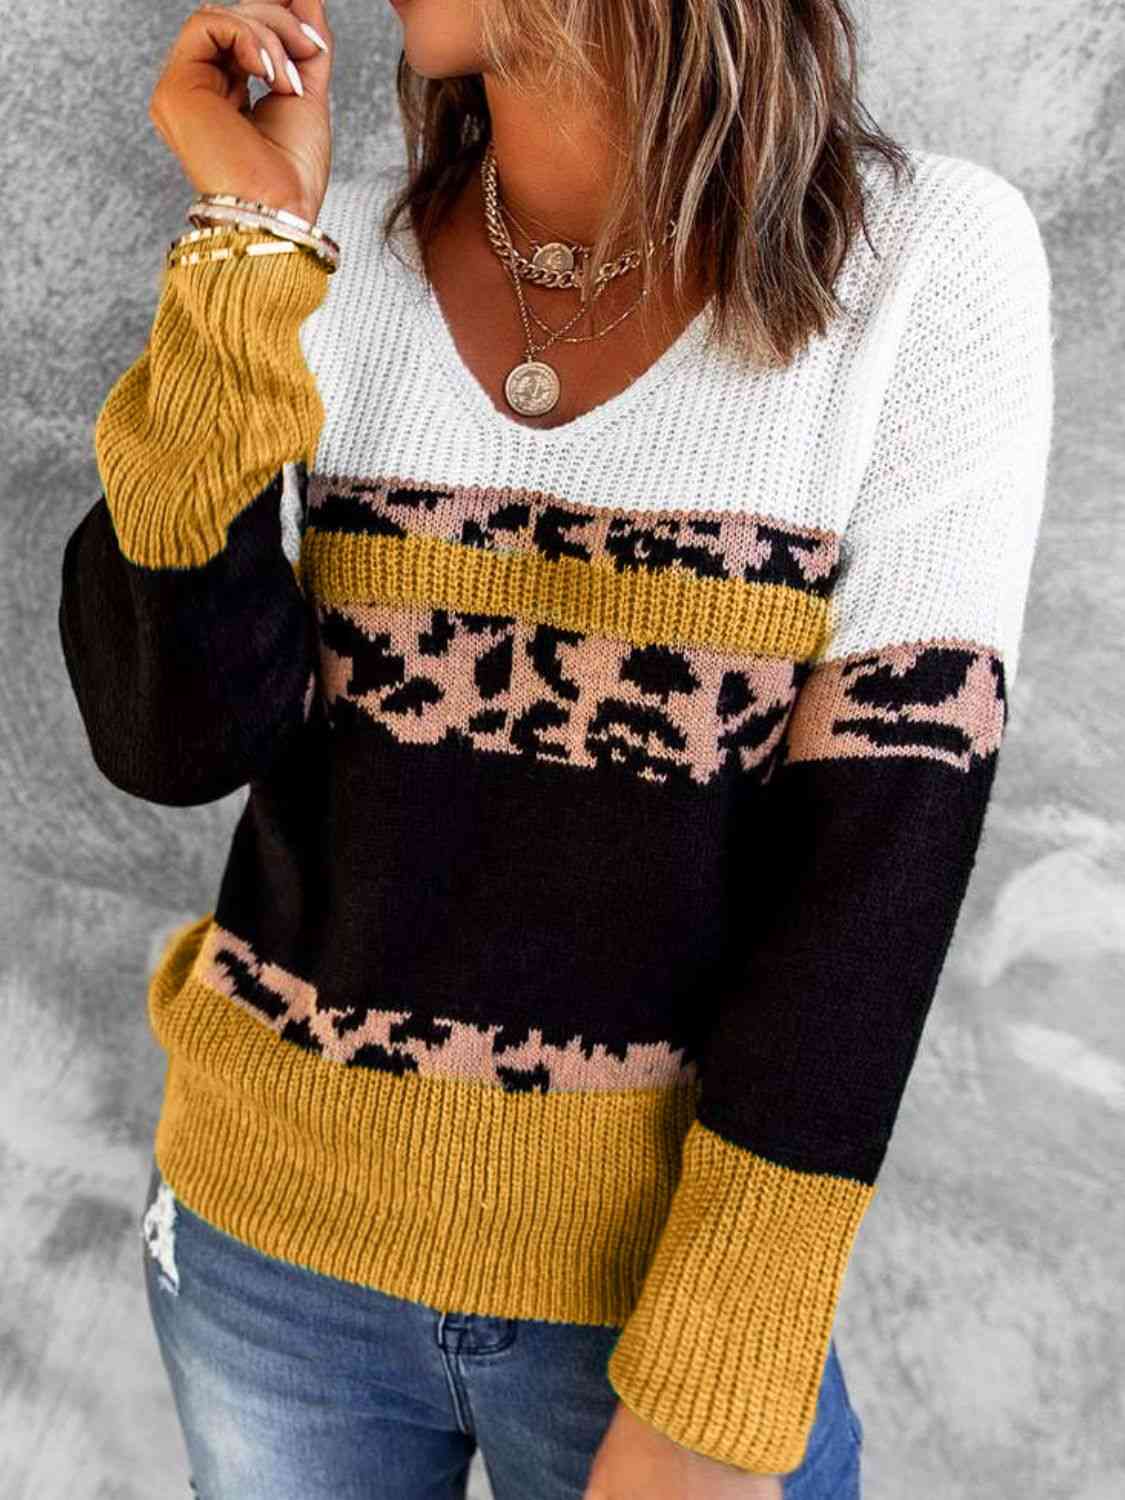 Woven Right Leopard Color Block V-Neck Rib-Knit Sweater Shirts & Tops Krazy Heart Designs Boutique Yellow S 